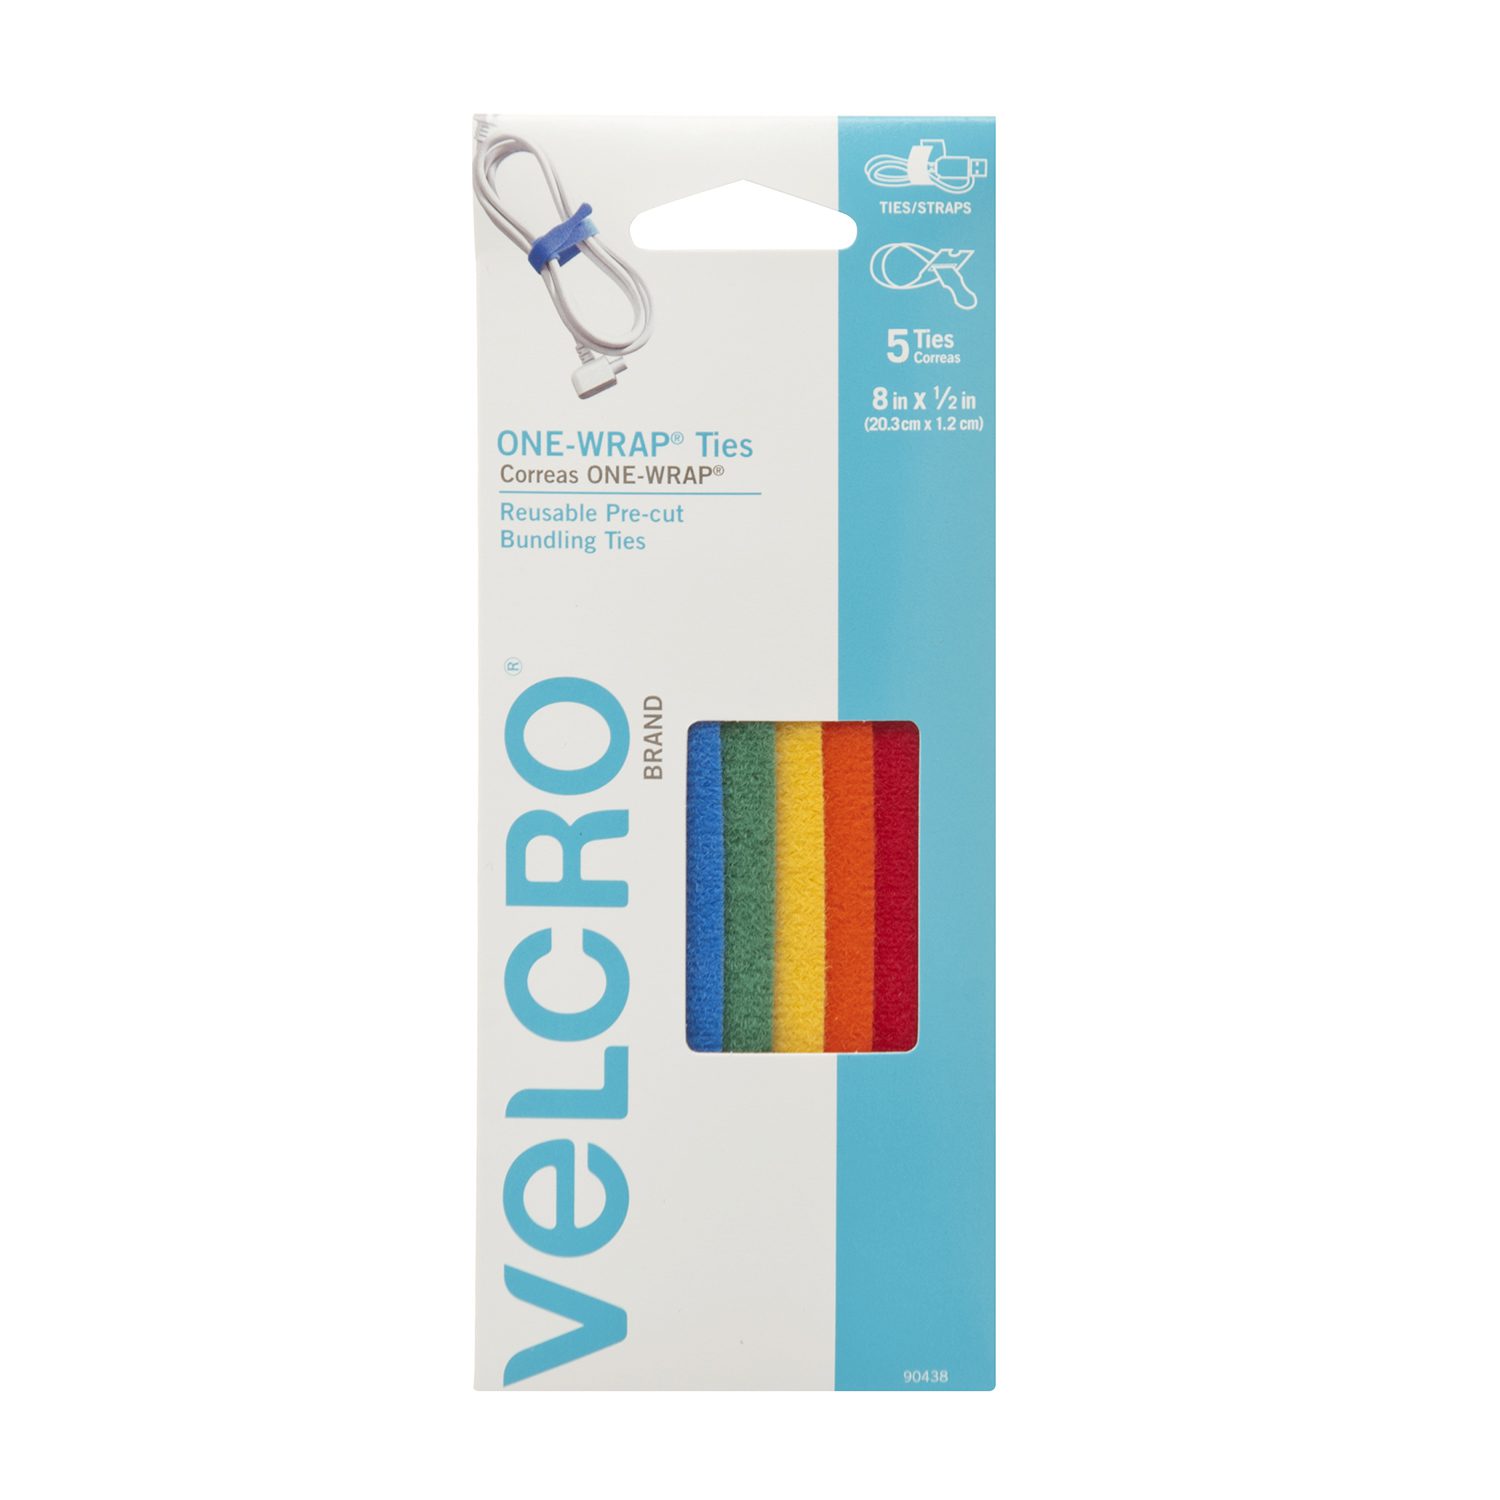 VELCRO Brand ONE-WRAP 10 x 25mm x 300mm Cable Tie ORANGE Double Sided Strapping 